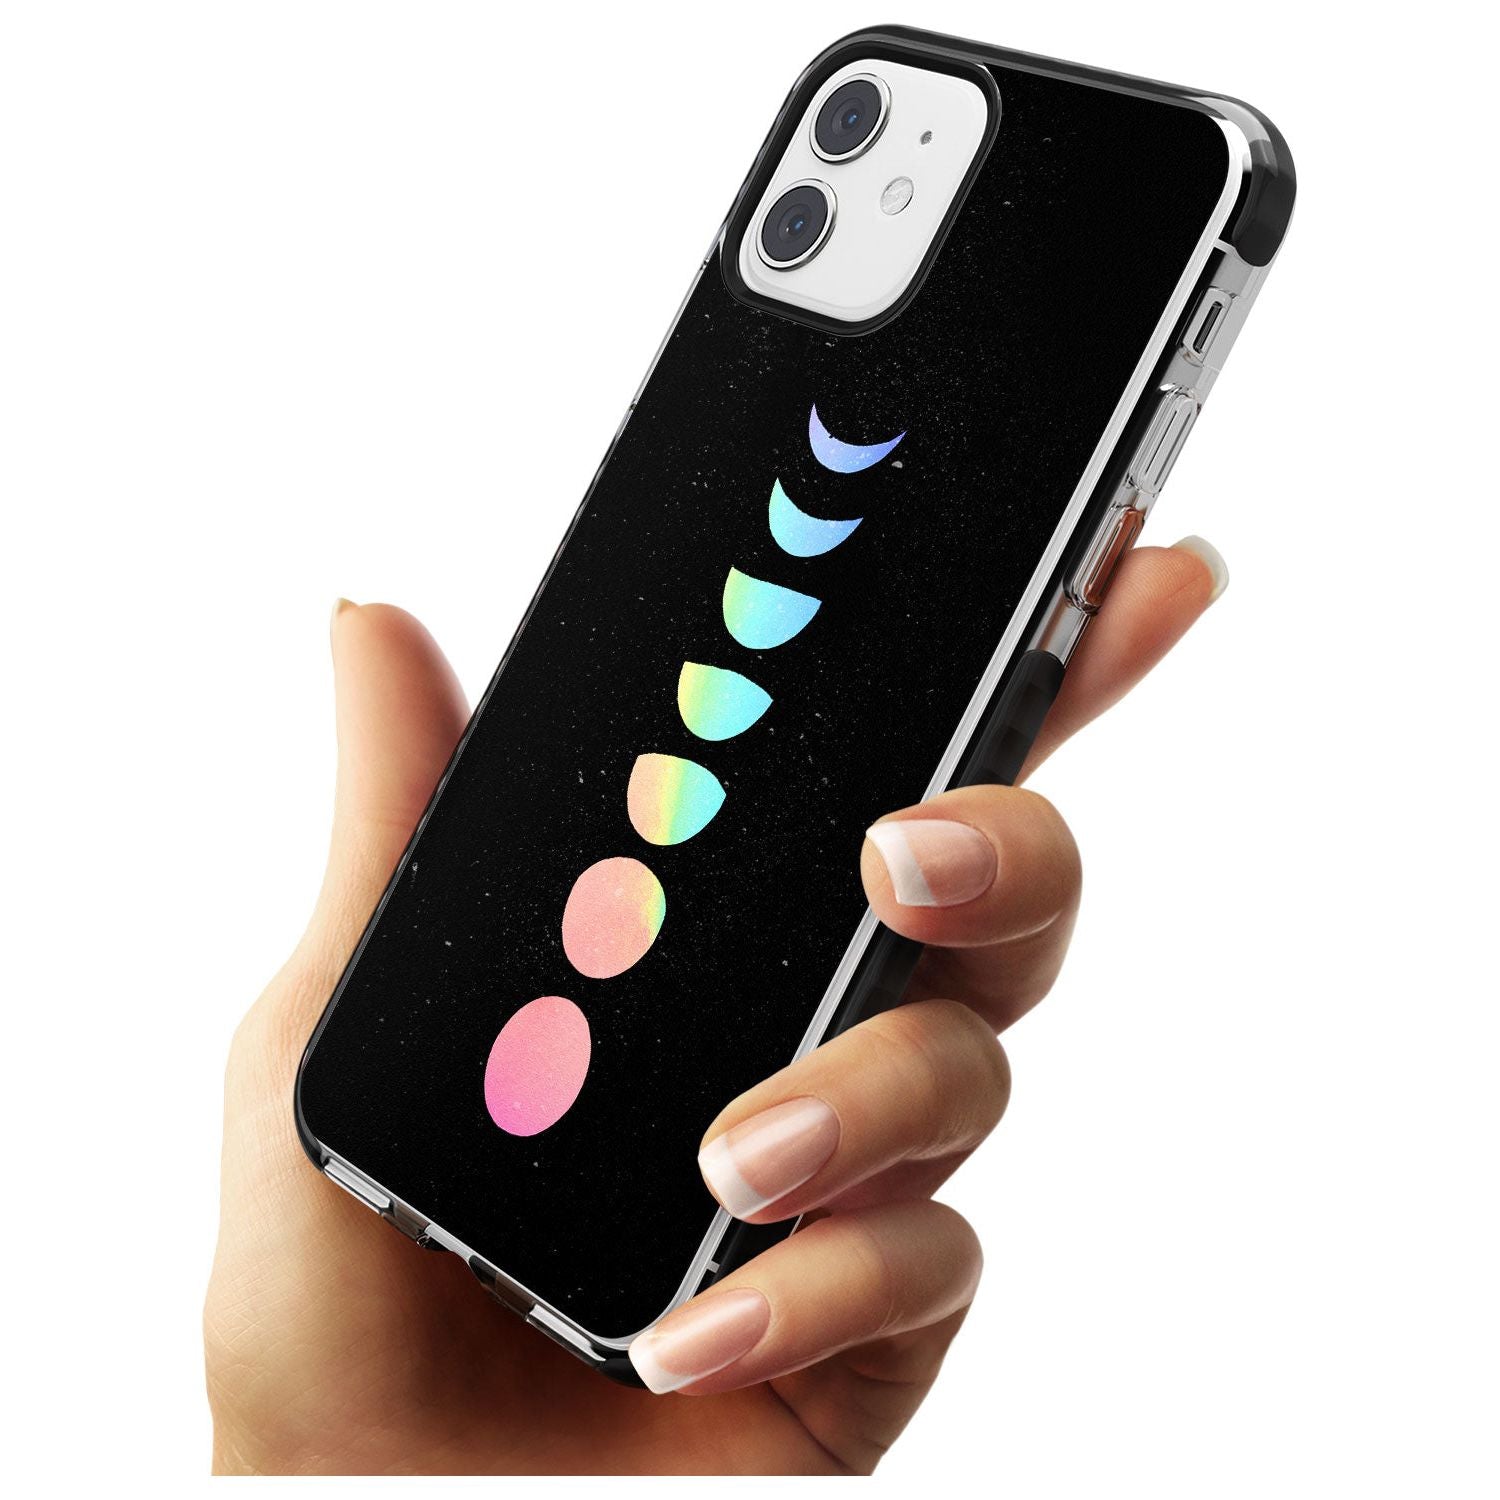 Pastel Moon Phases Pink Fade Impact Phone Case for iPhone 11 Pro Max